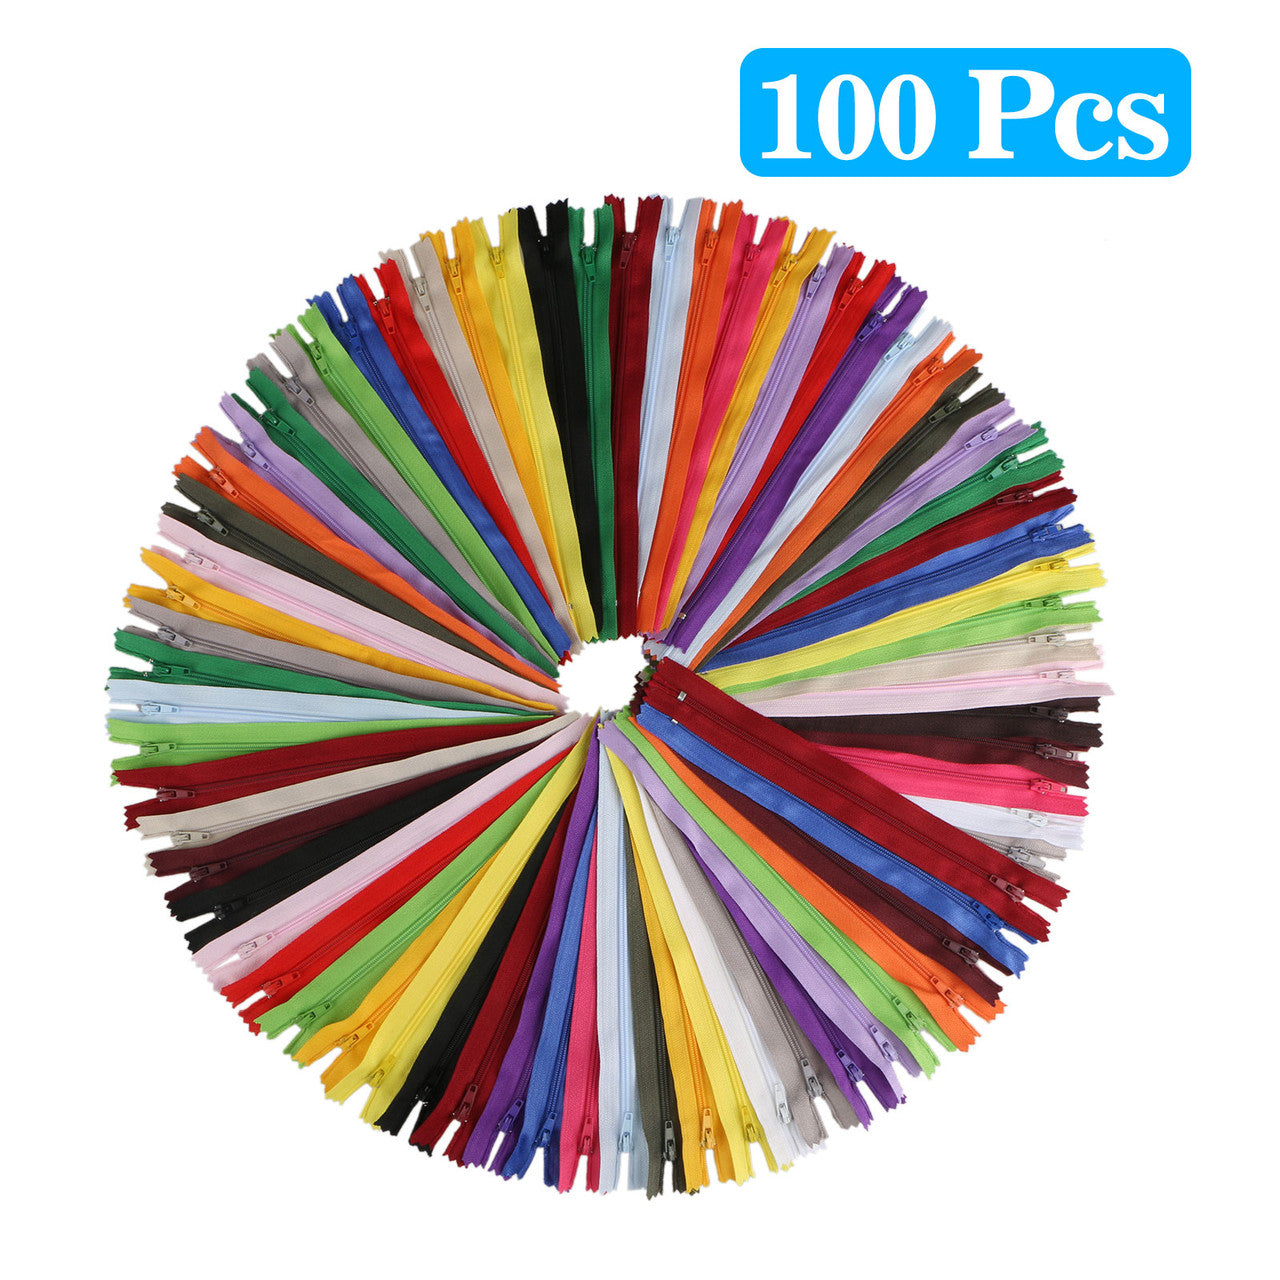 Colored Nylon Coil Zipper Tailor Sewer Craft 20cm Crafter's DIY 20 Colors for Sewing, Handbag, Purse Making, Clothing, Wholesale Pack, 100Pcs